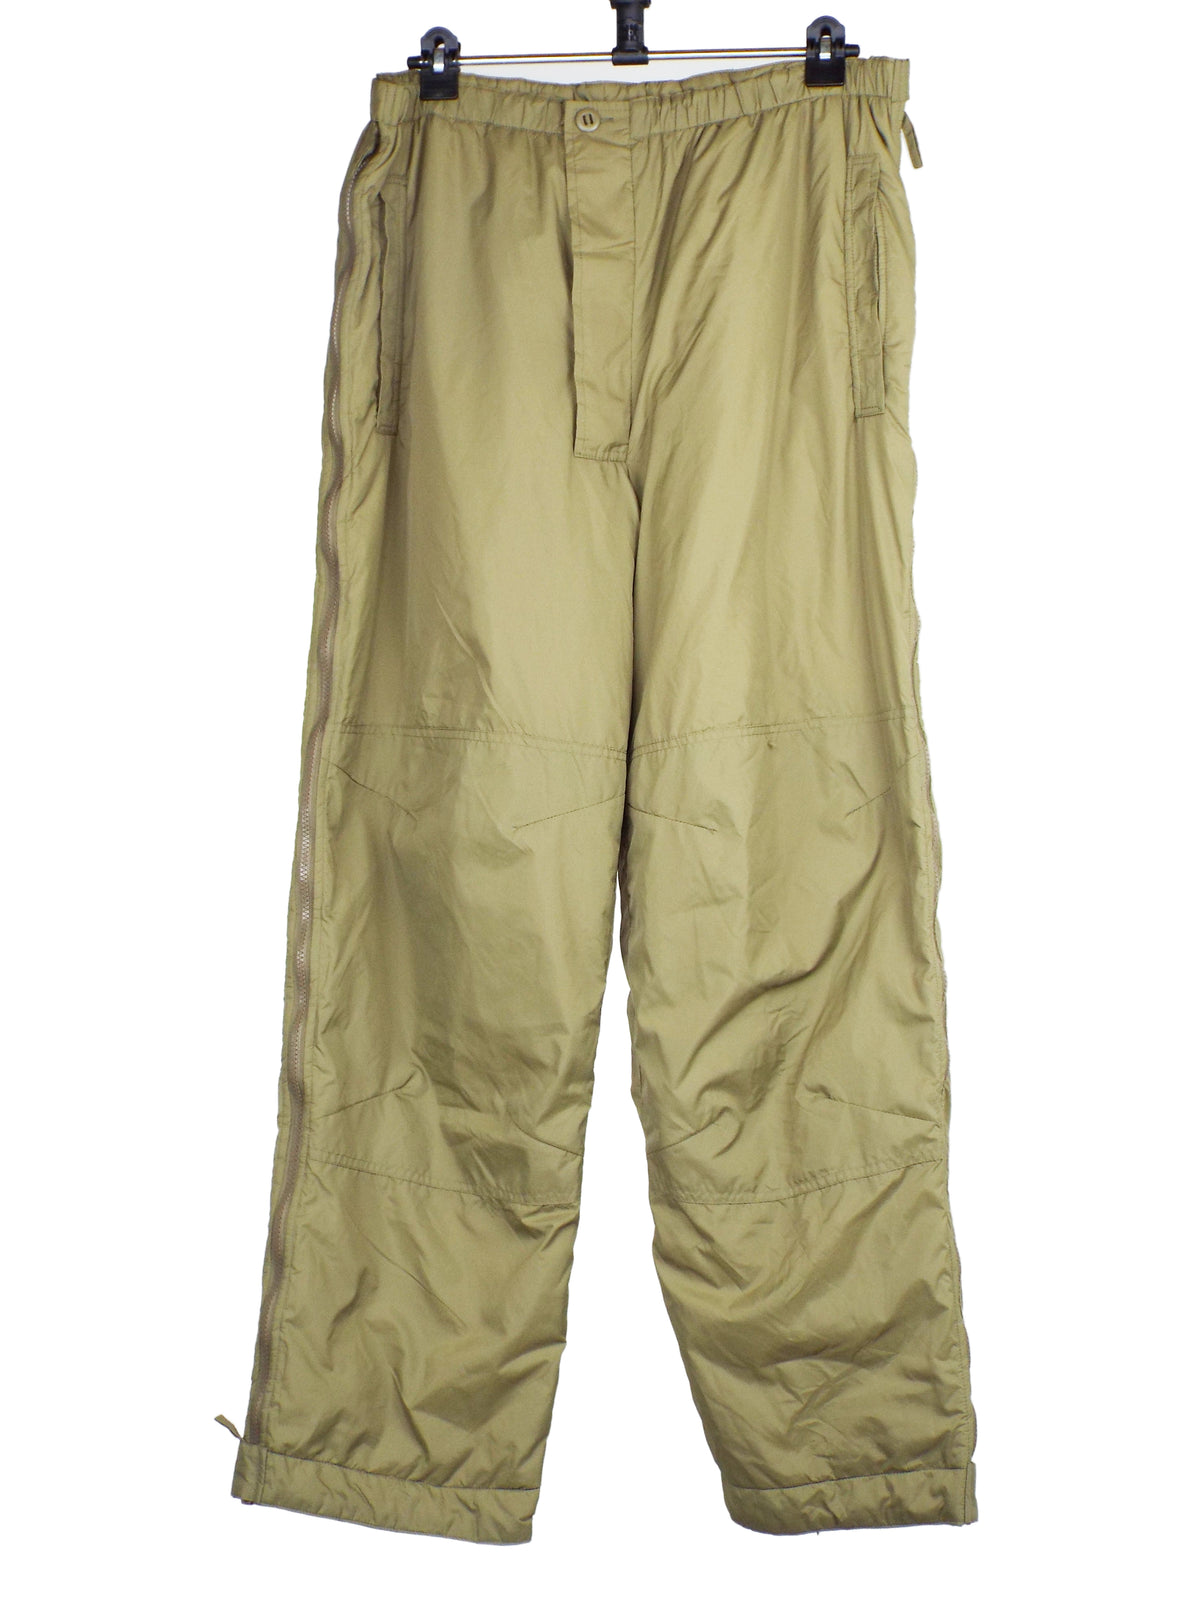 British Soft Insulated Cold Weather over-trousers - full-length leg si ...